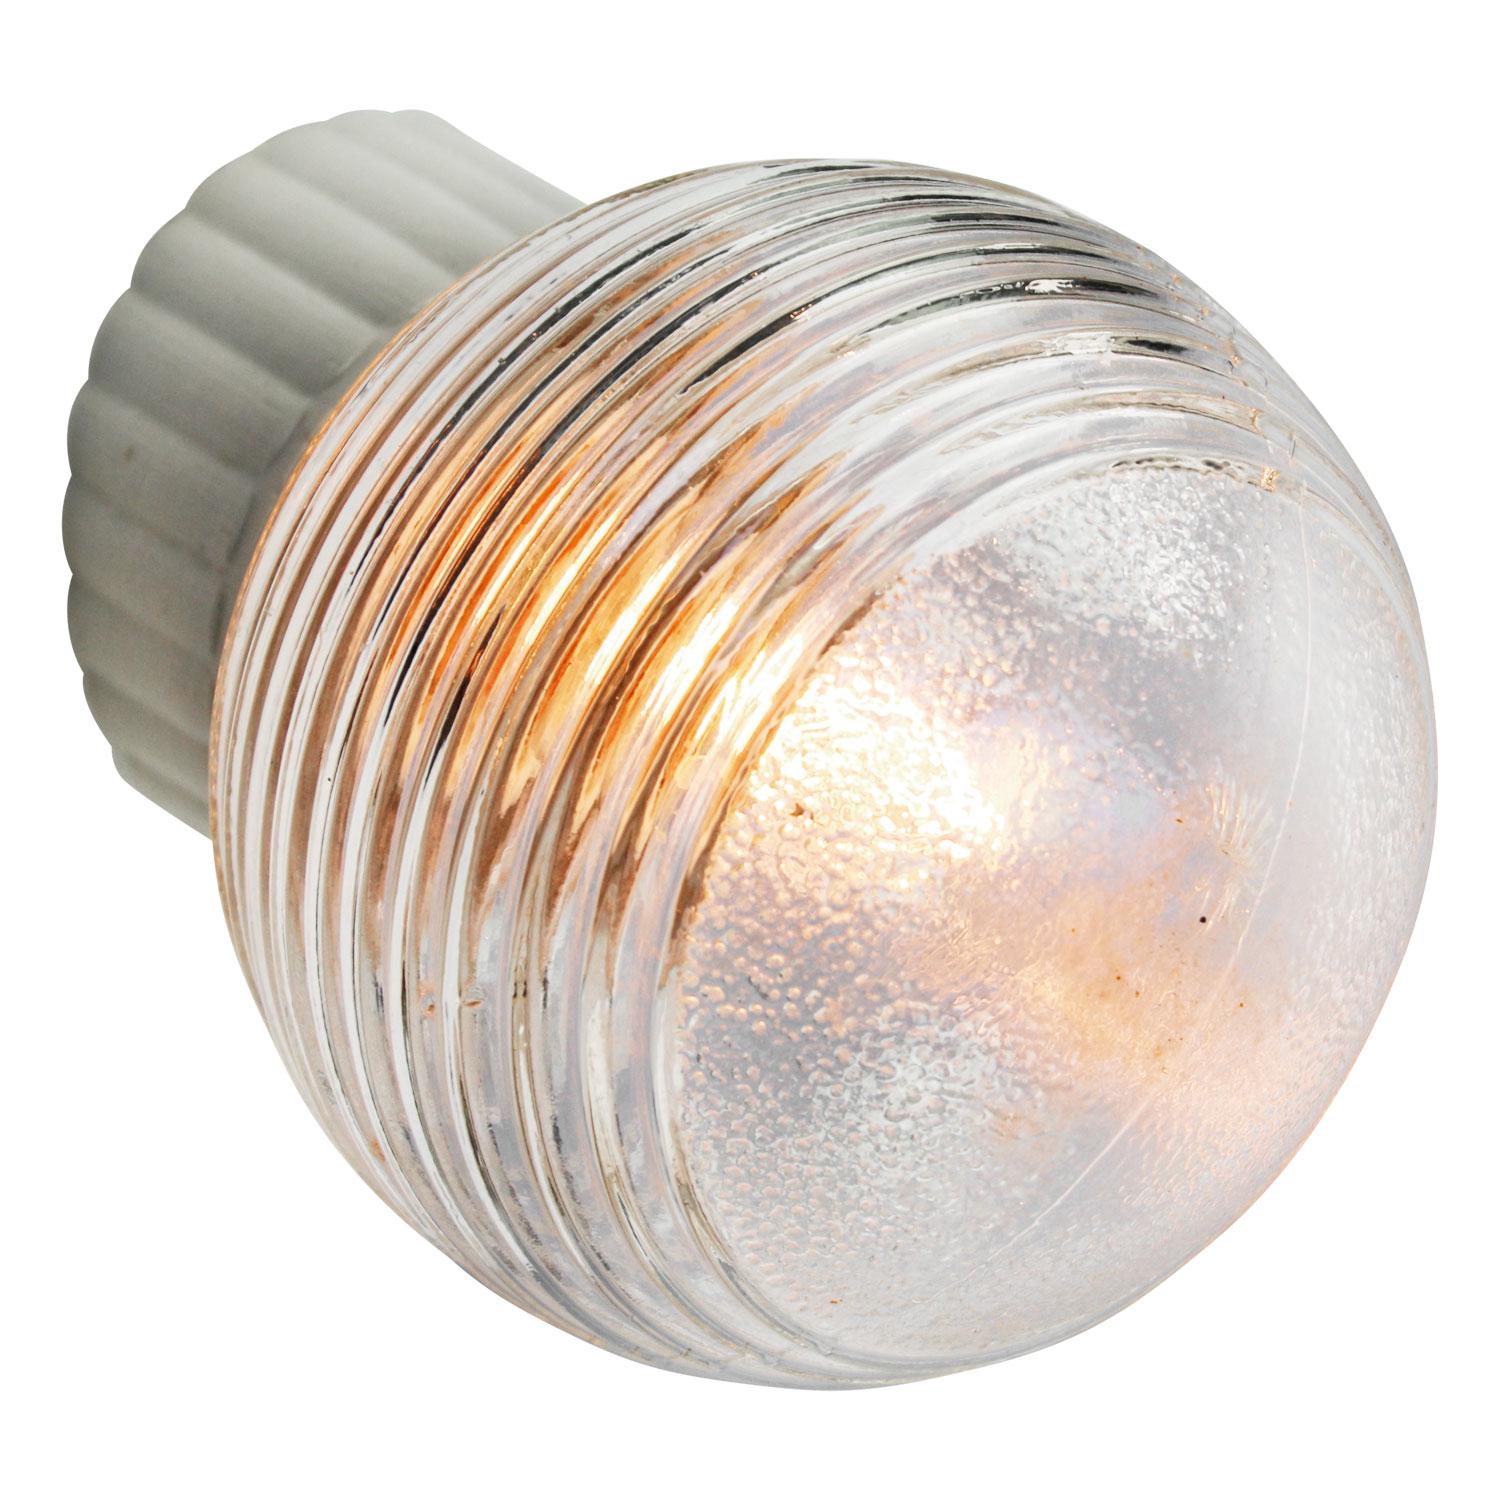 Industrial wall lamp.
White porcelain, striped glass.
2 conductors, no ground.

Weight: 0.96 kg / 2.1 lb

Priced per individual item. All lamps have been made suitable by international standards for incandescent light bulbs, energy-efficient